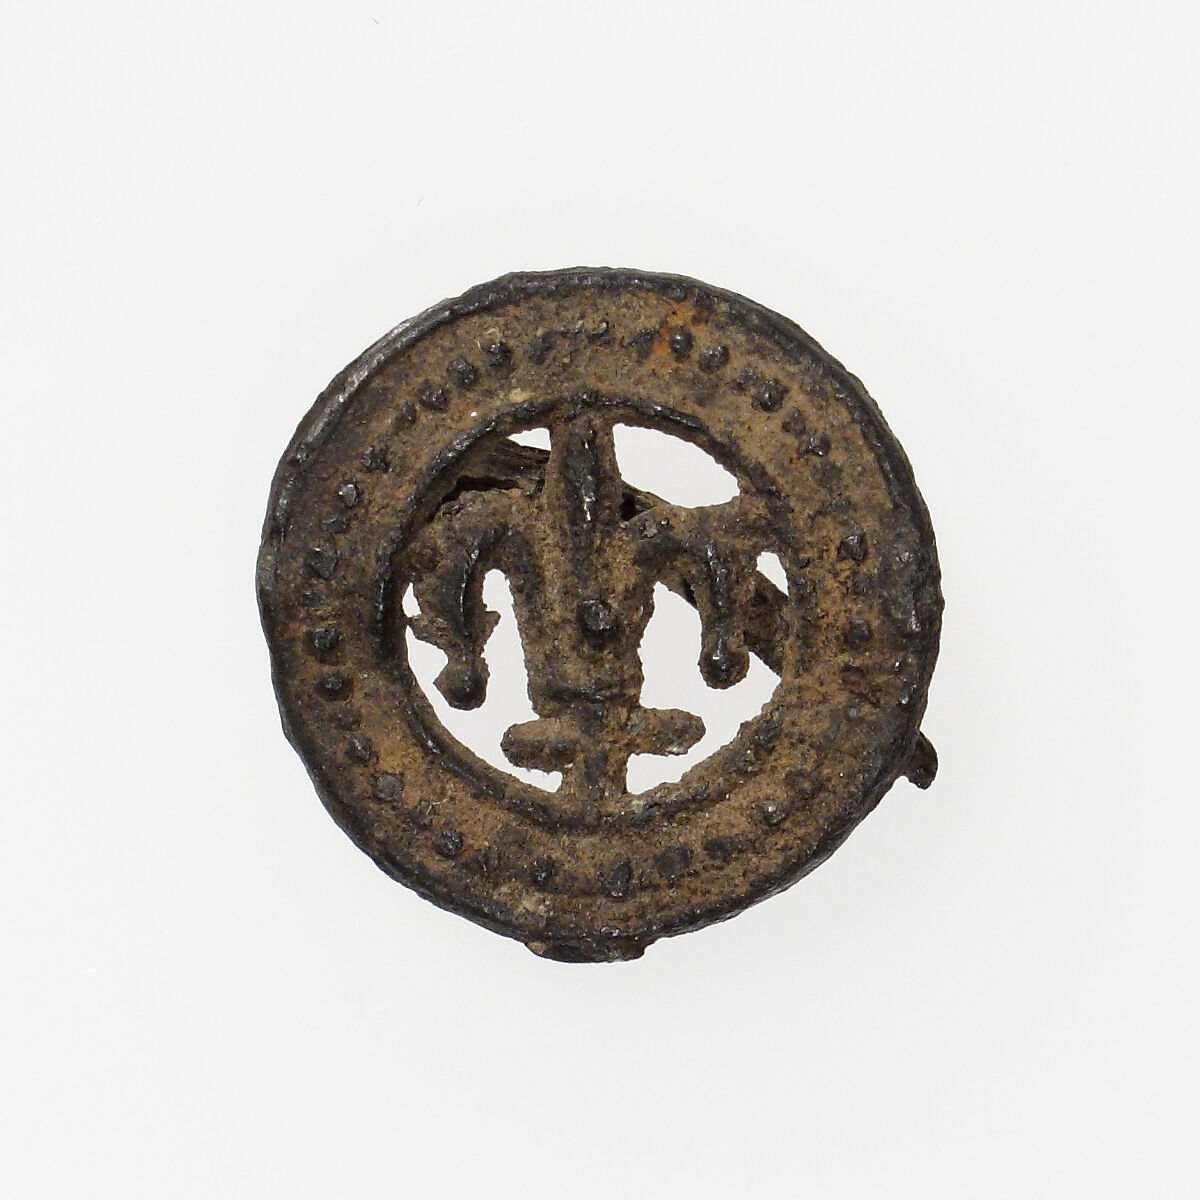 Pilgrim's Badge in the form of a Ring brooch, Lead, French 